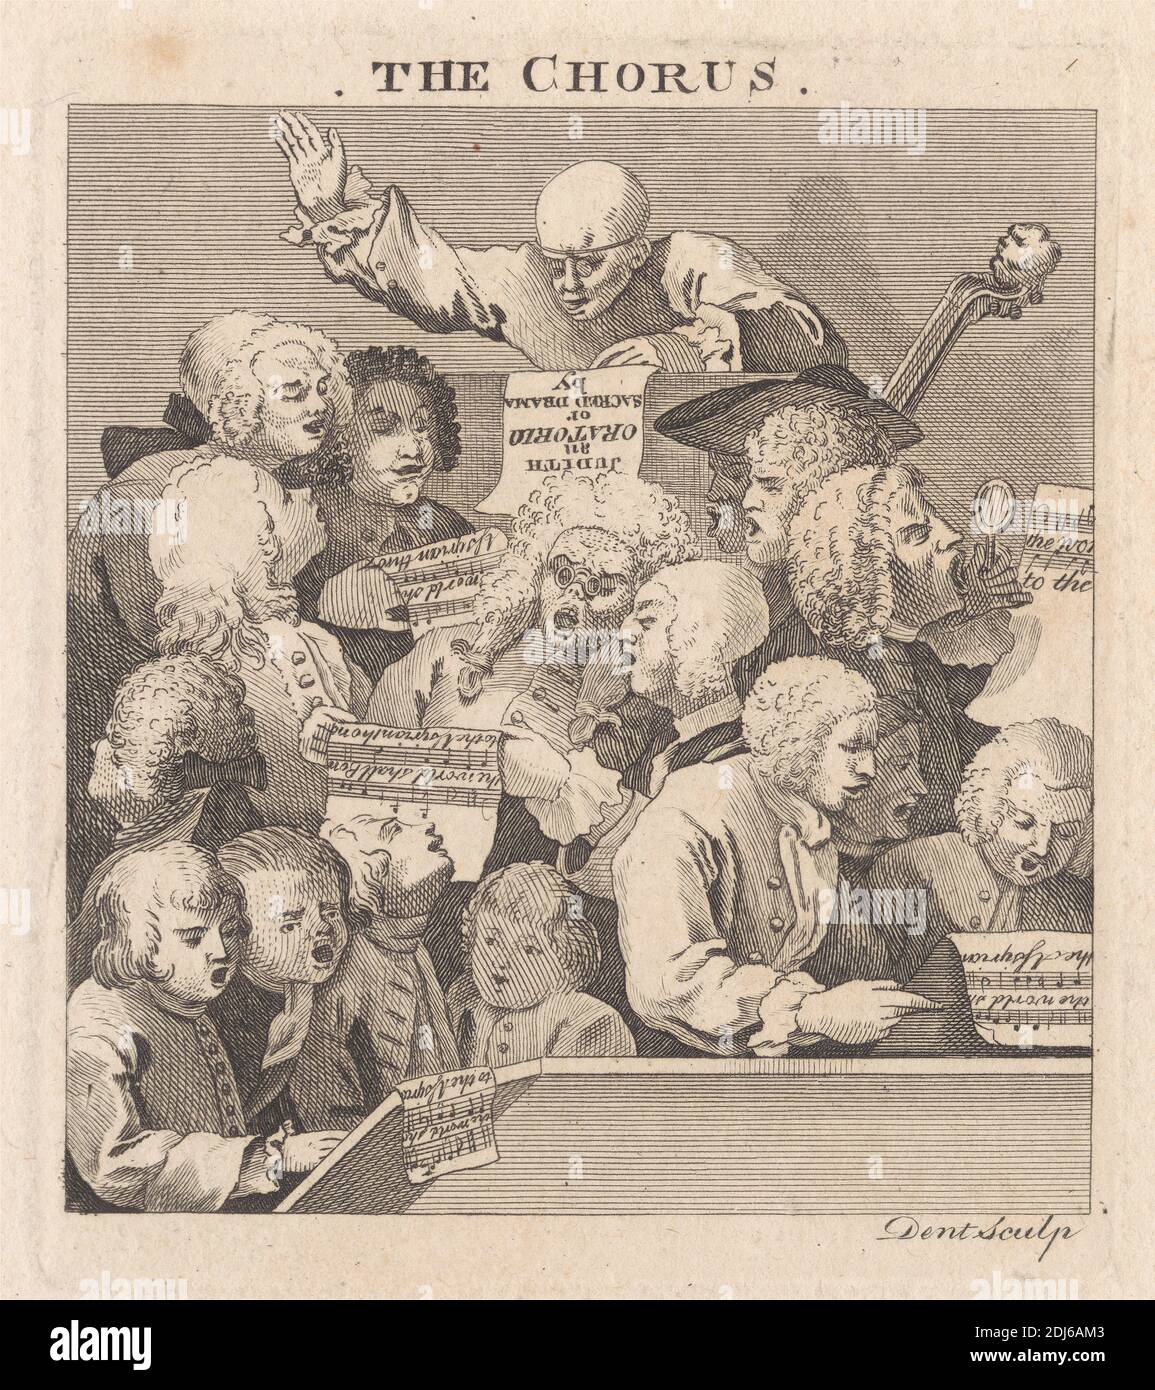 The Chorus, after William Hogarth, 1697–1764, British, 1768, Etching and line engraving on medium, slightly textured, cream laid paper Stock Photo